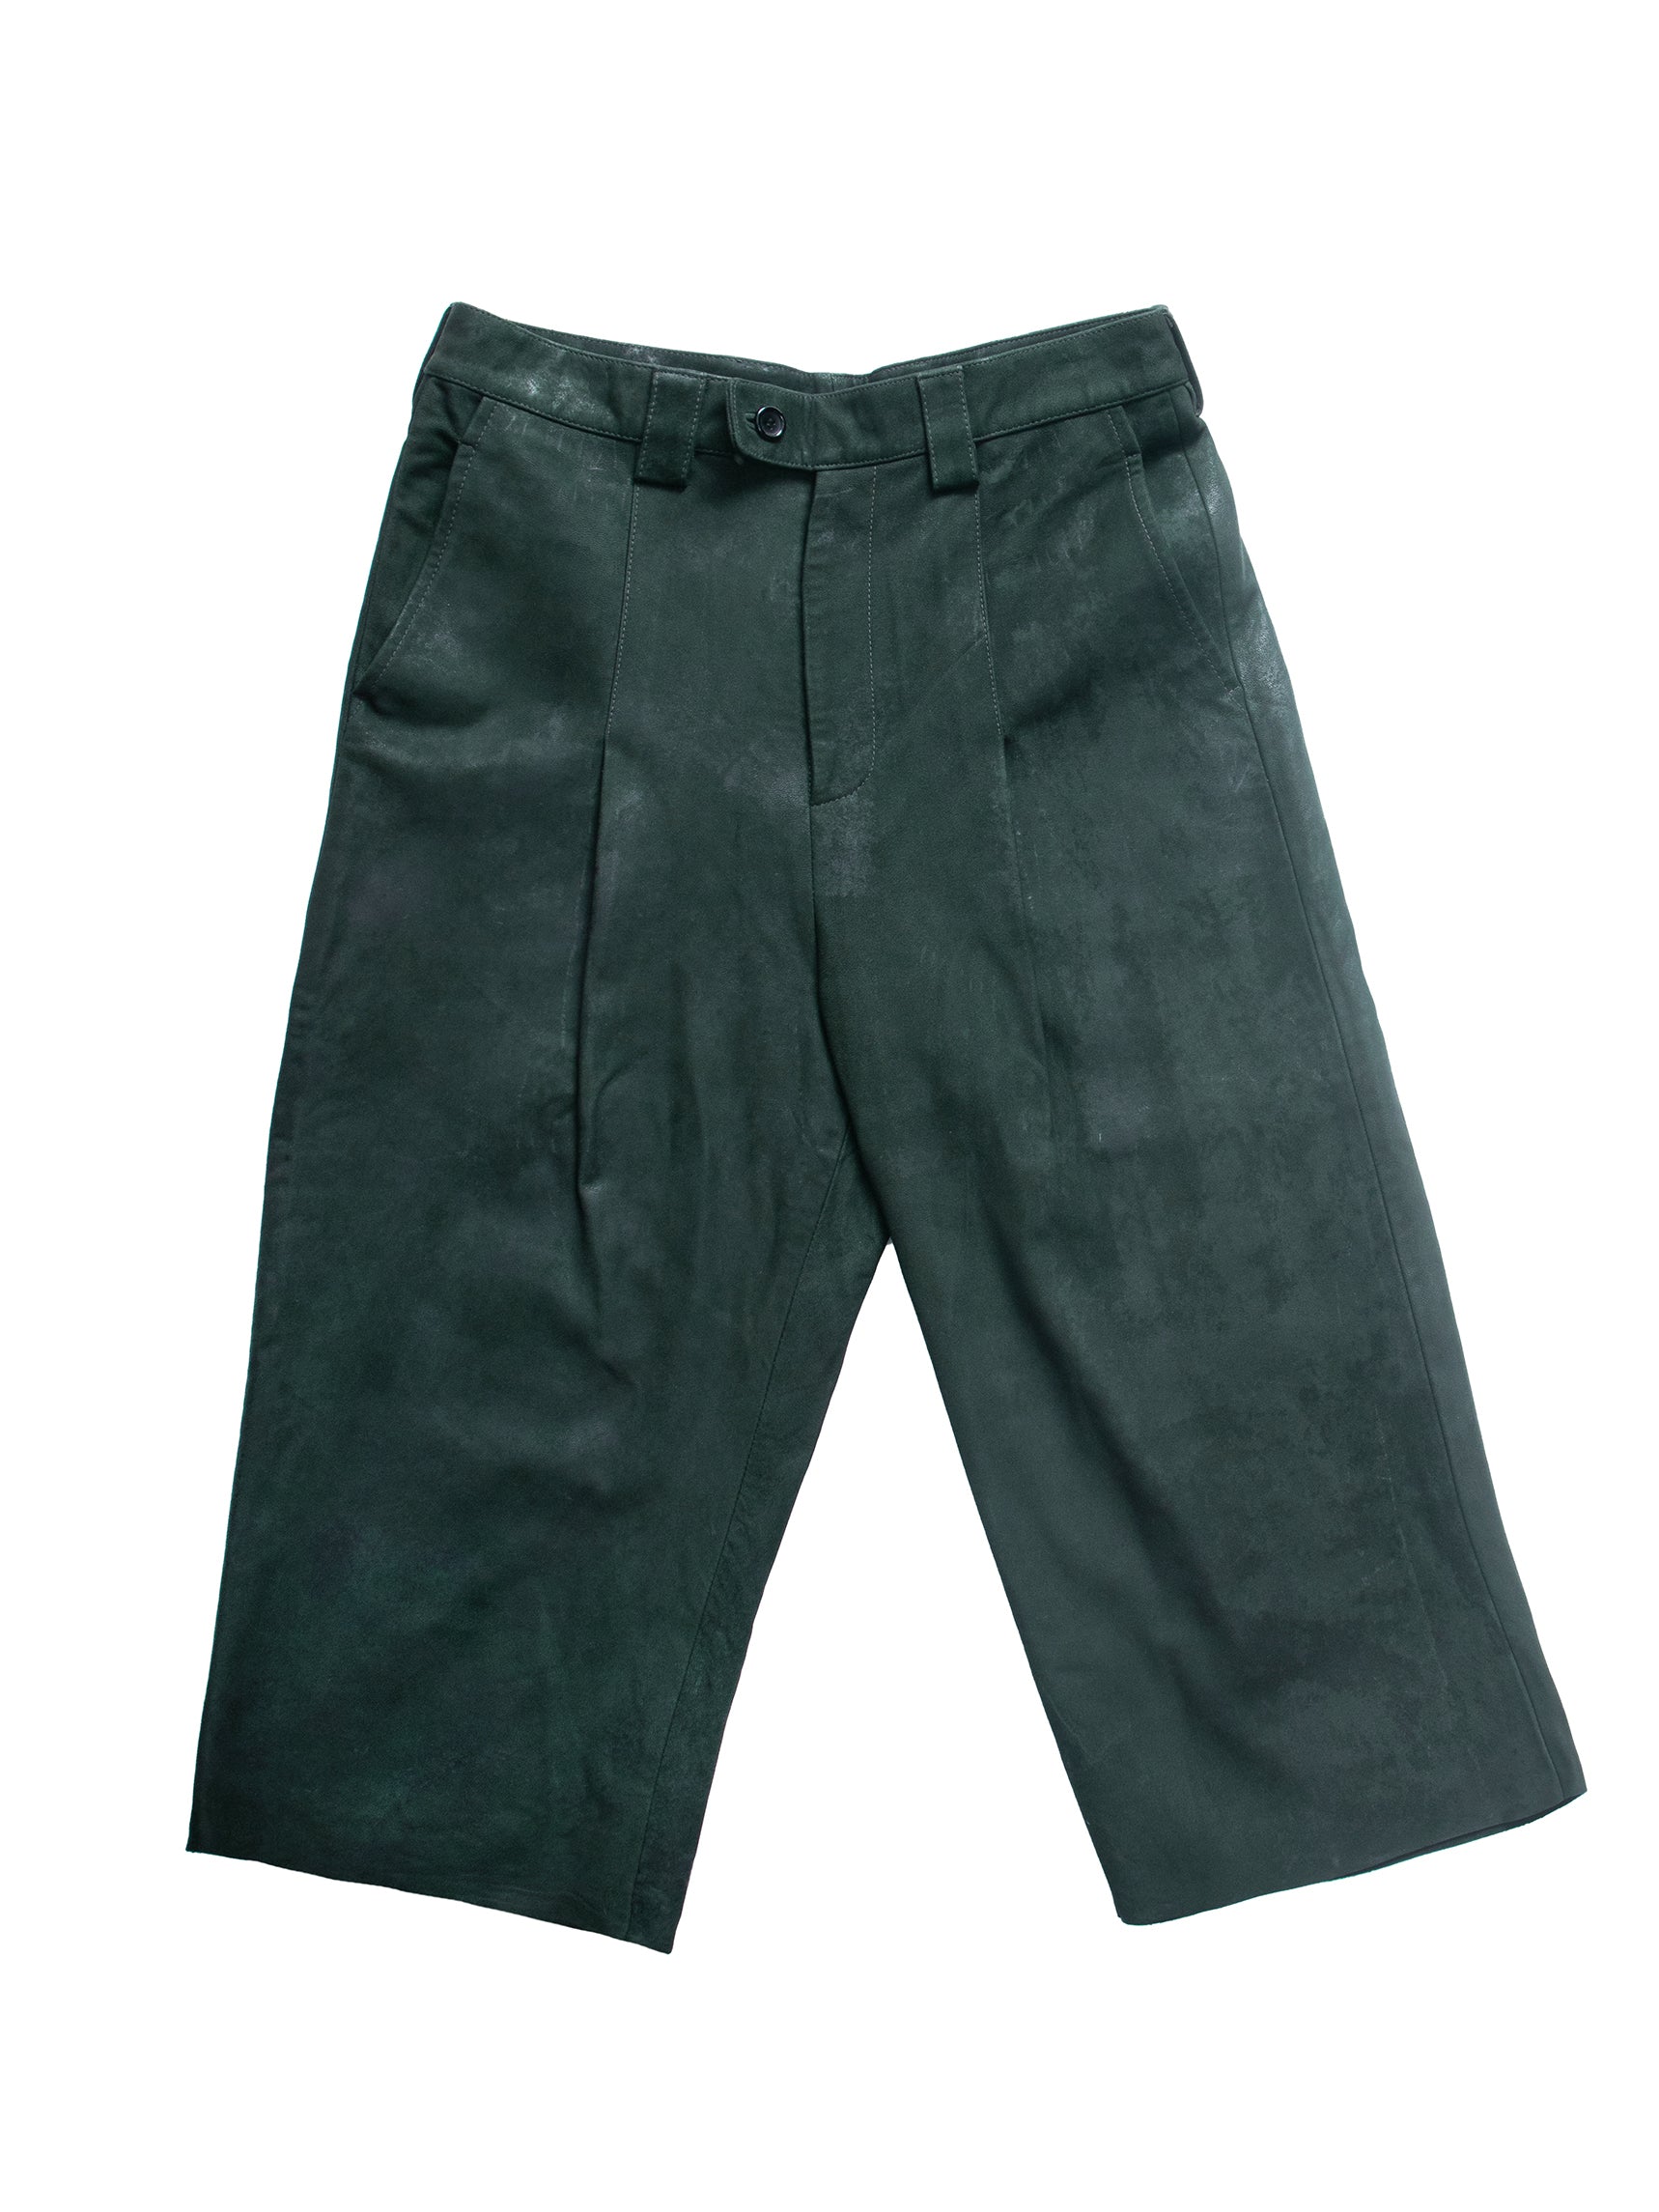 Moss Green Leather Long Pleated Shorts